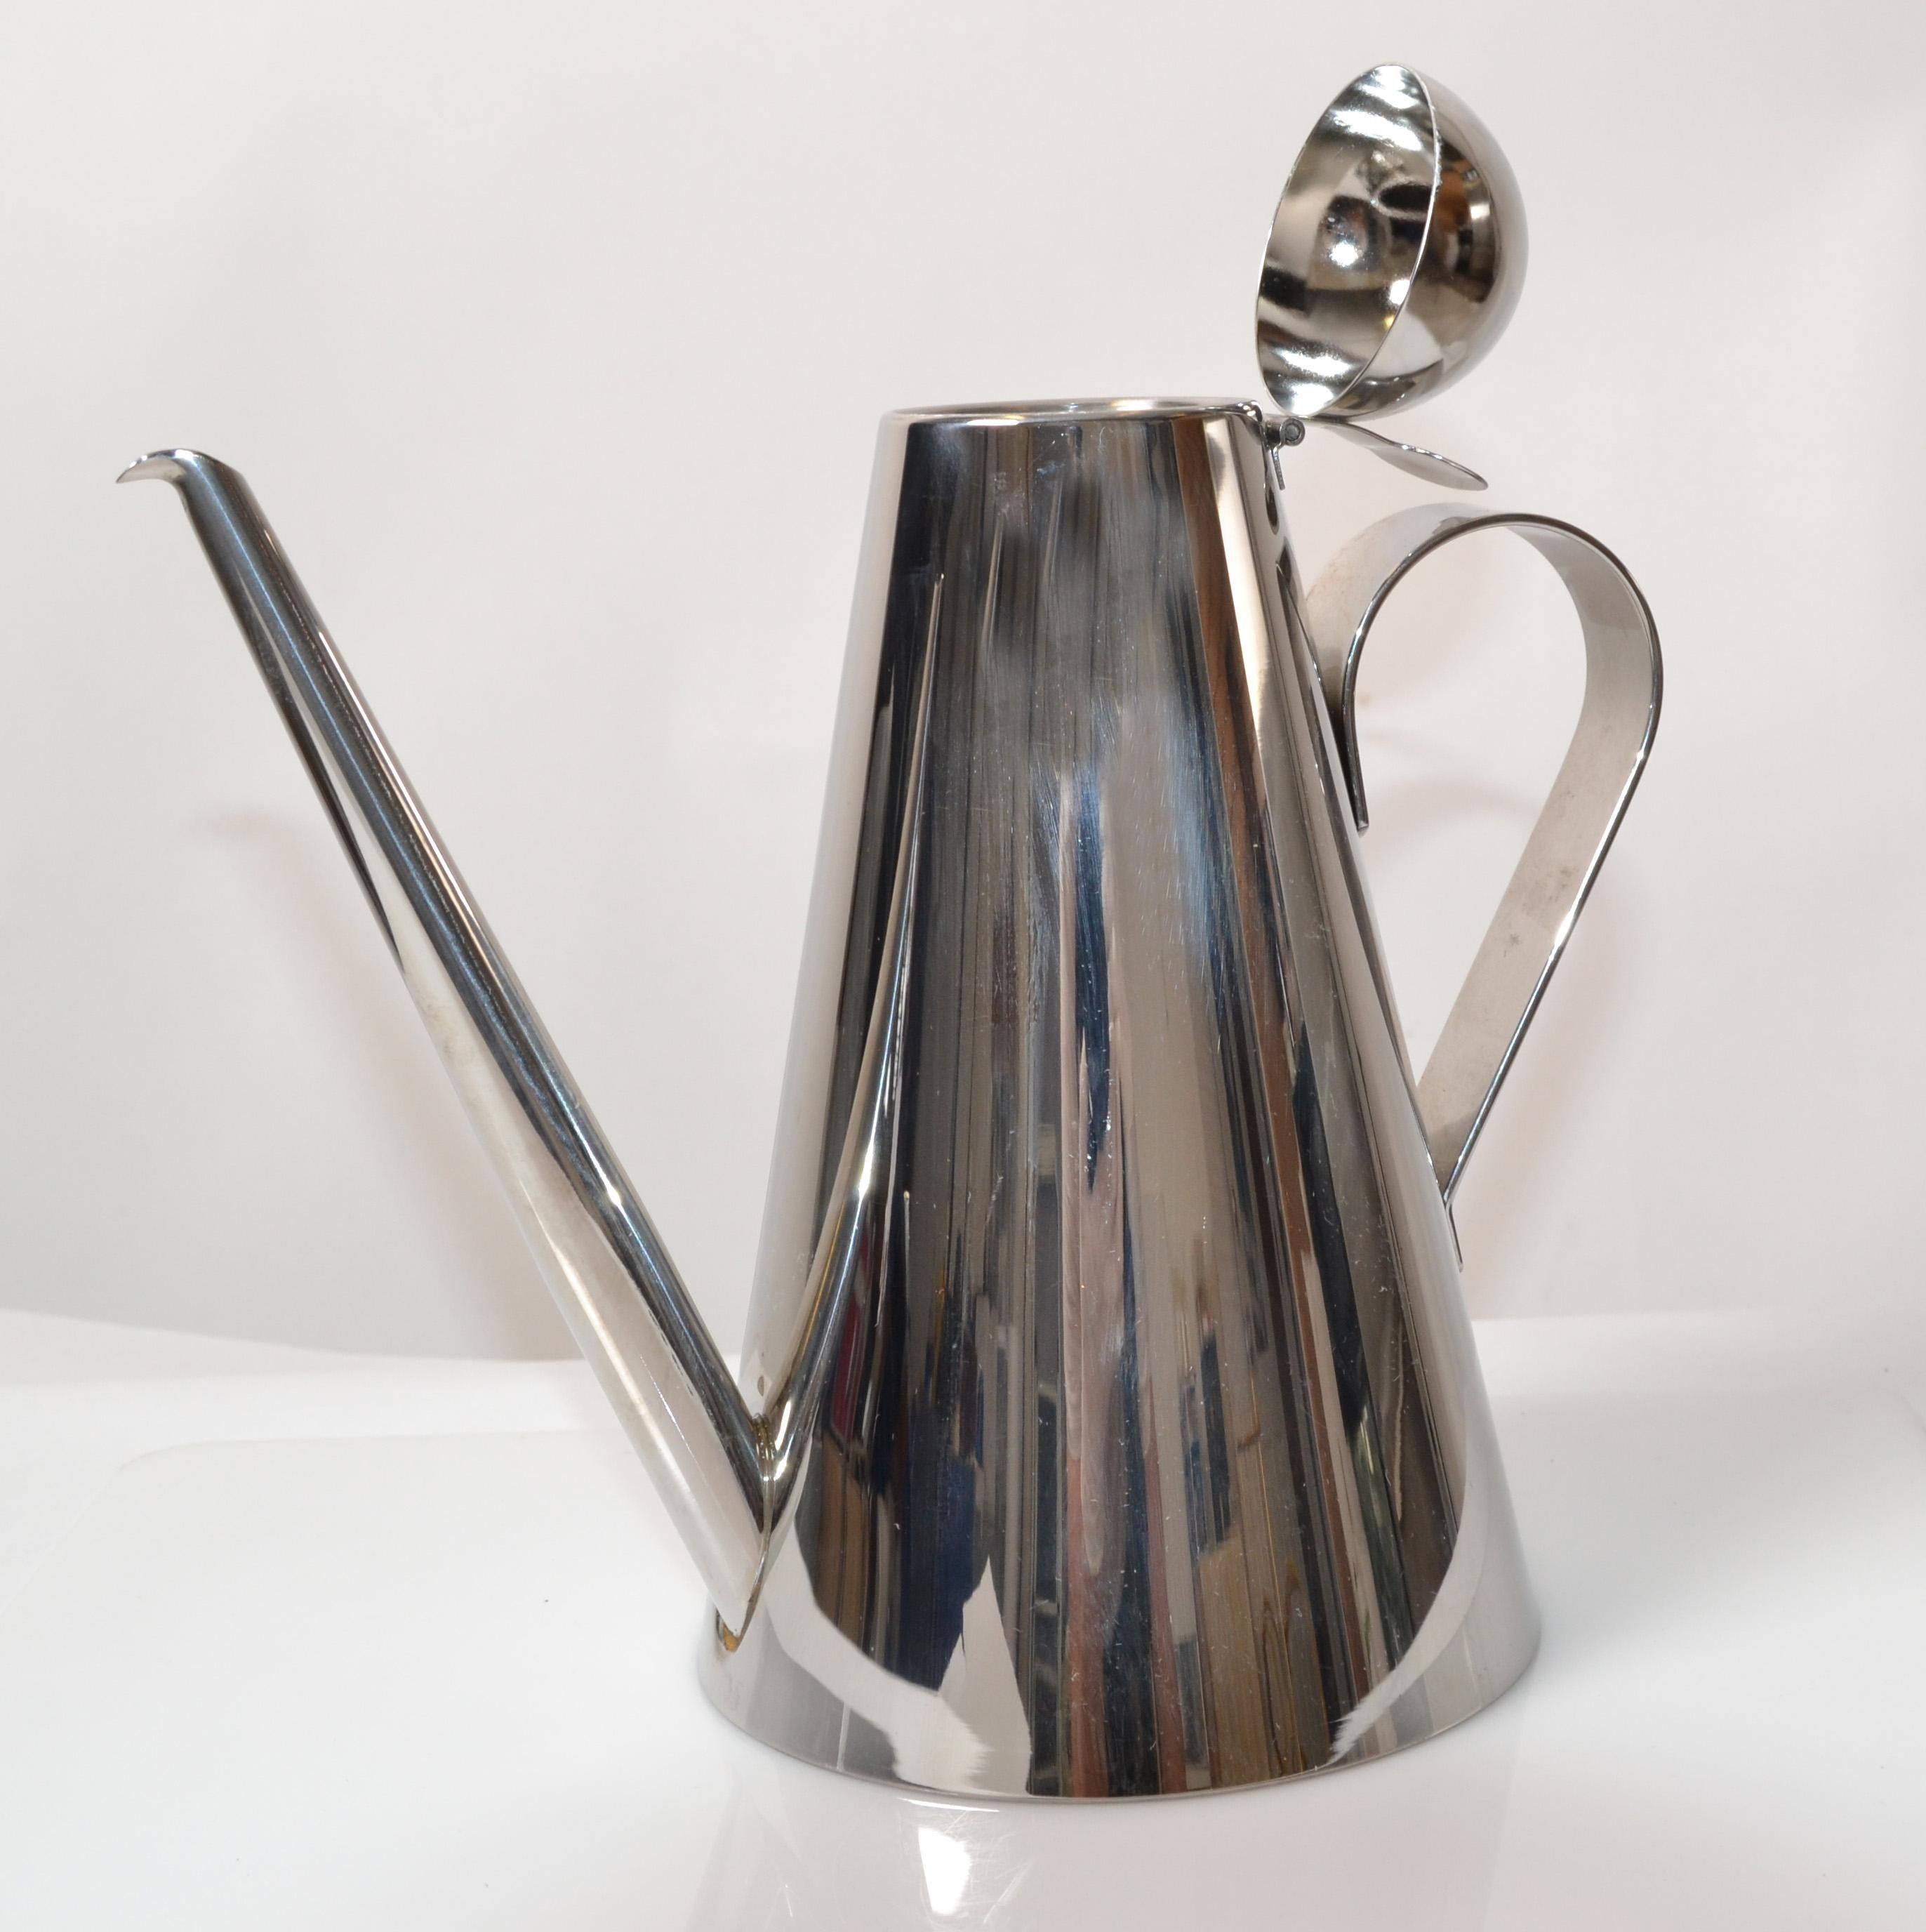 Contemporary Cerutti Italy Tea, Coffee Pot, Carafe, Vessel INOX 18/10 Stainless Steel For Sale